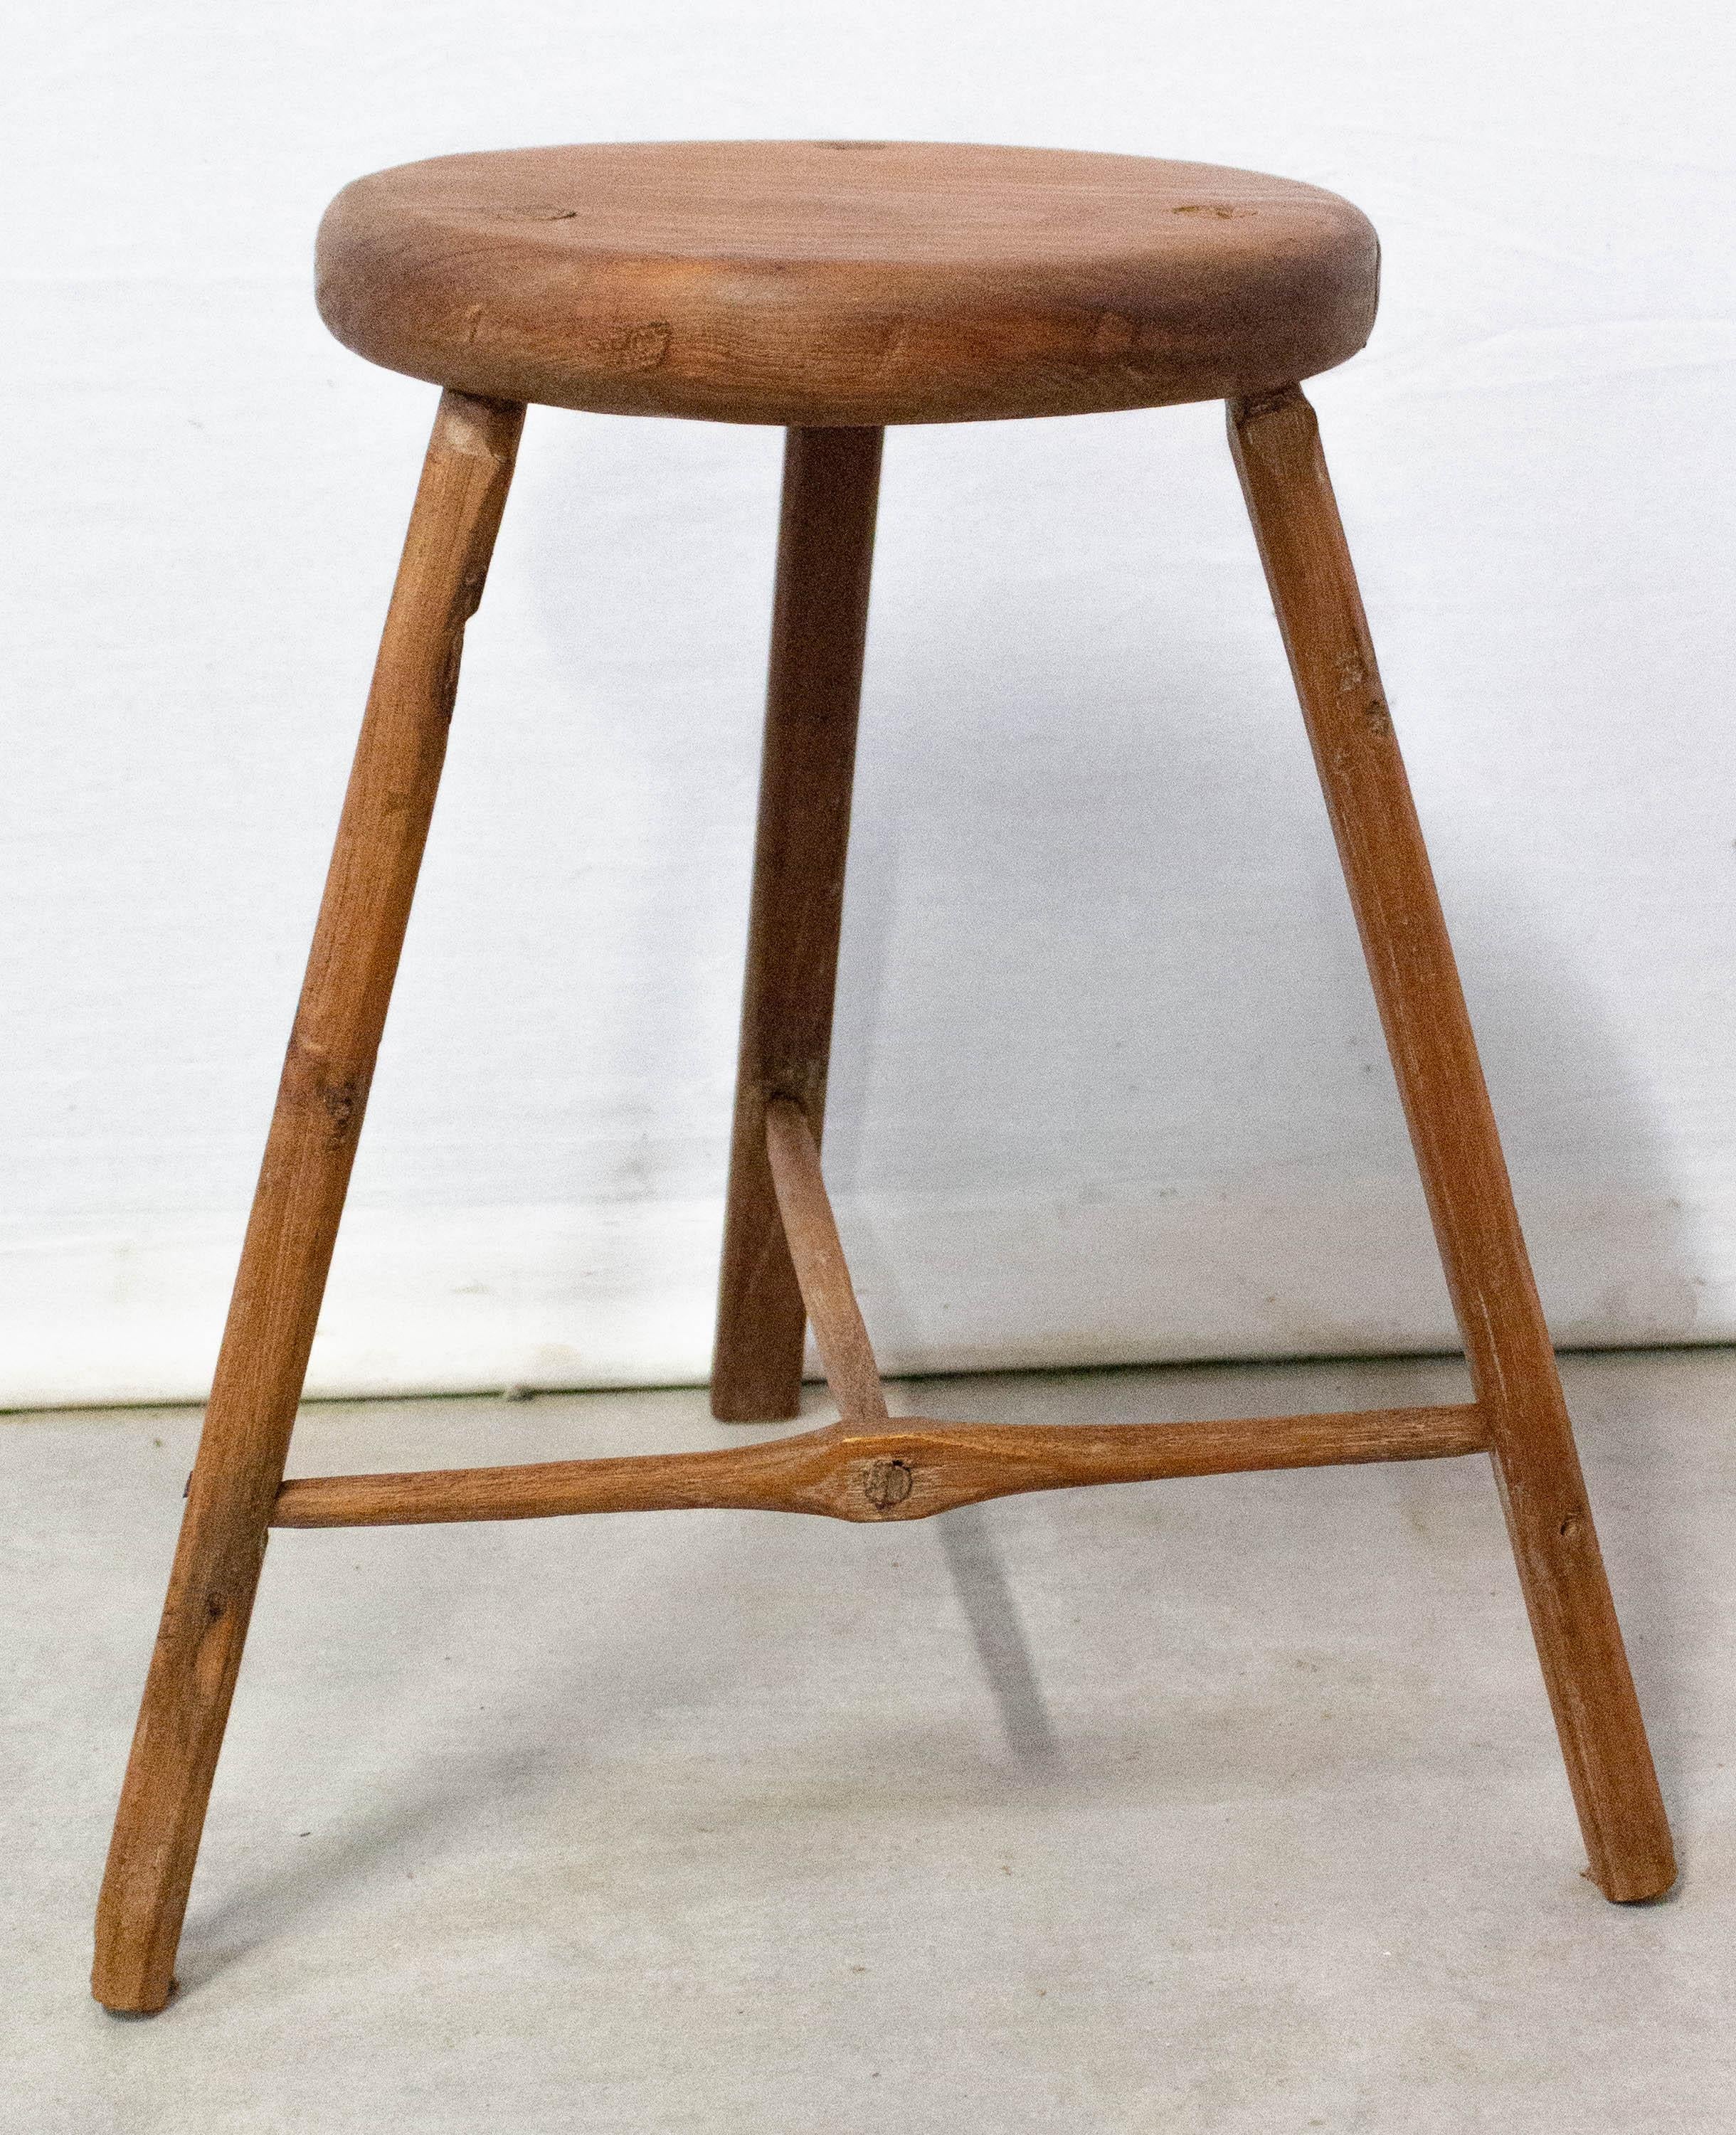 Milking stool or three-leg stool 1960 France
Acacia
The three legs are joined by two perpendicular cross-supports that sit low to the ground for added stability.
Very good condition.

For shipping: 41 x 41 x 47 cm 3 kg.